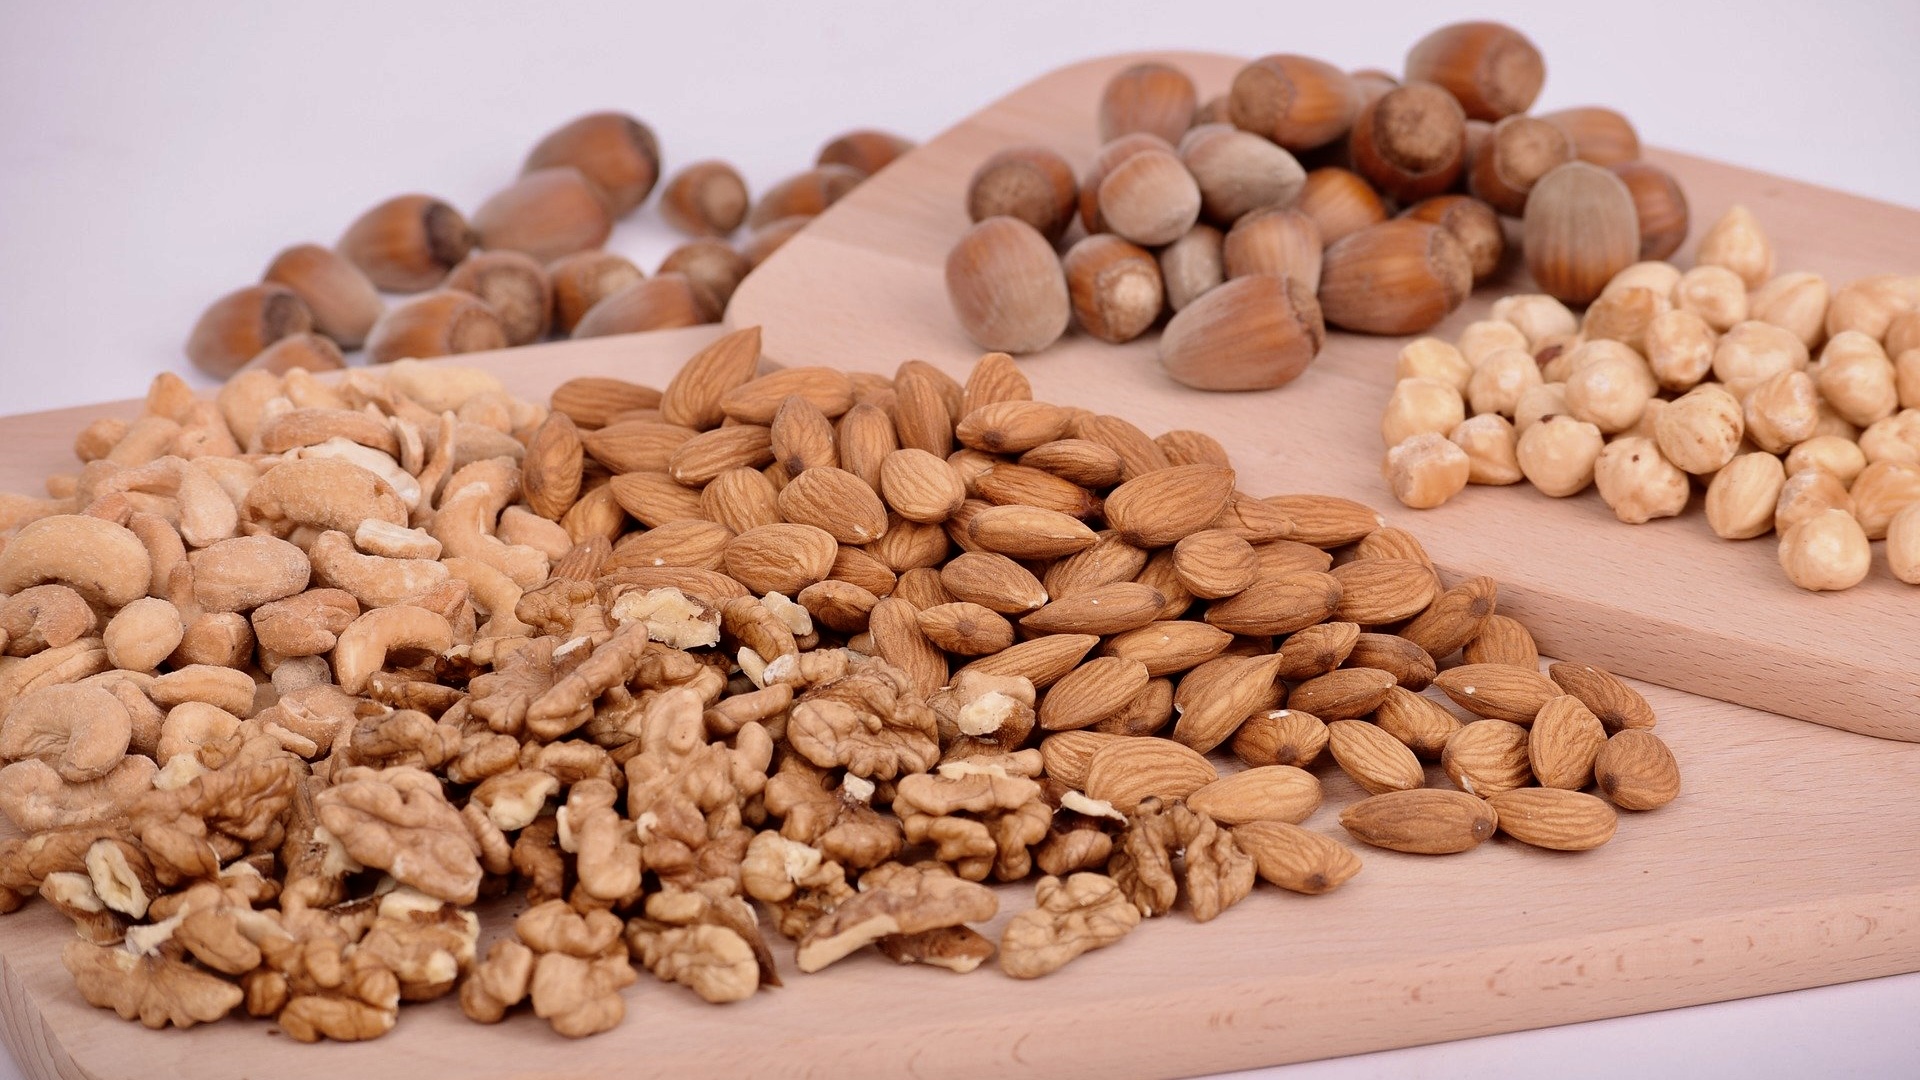 ARE NUTS REALLY WHAT THEY’RE CRACKED UP TO BE?